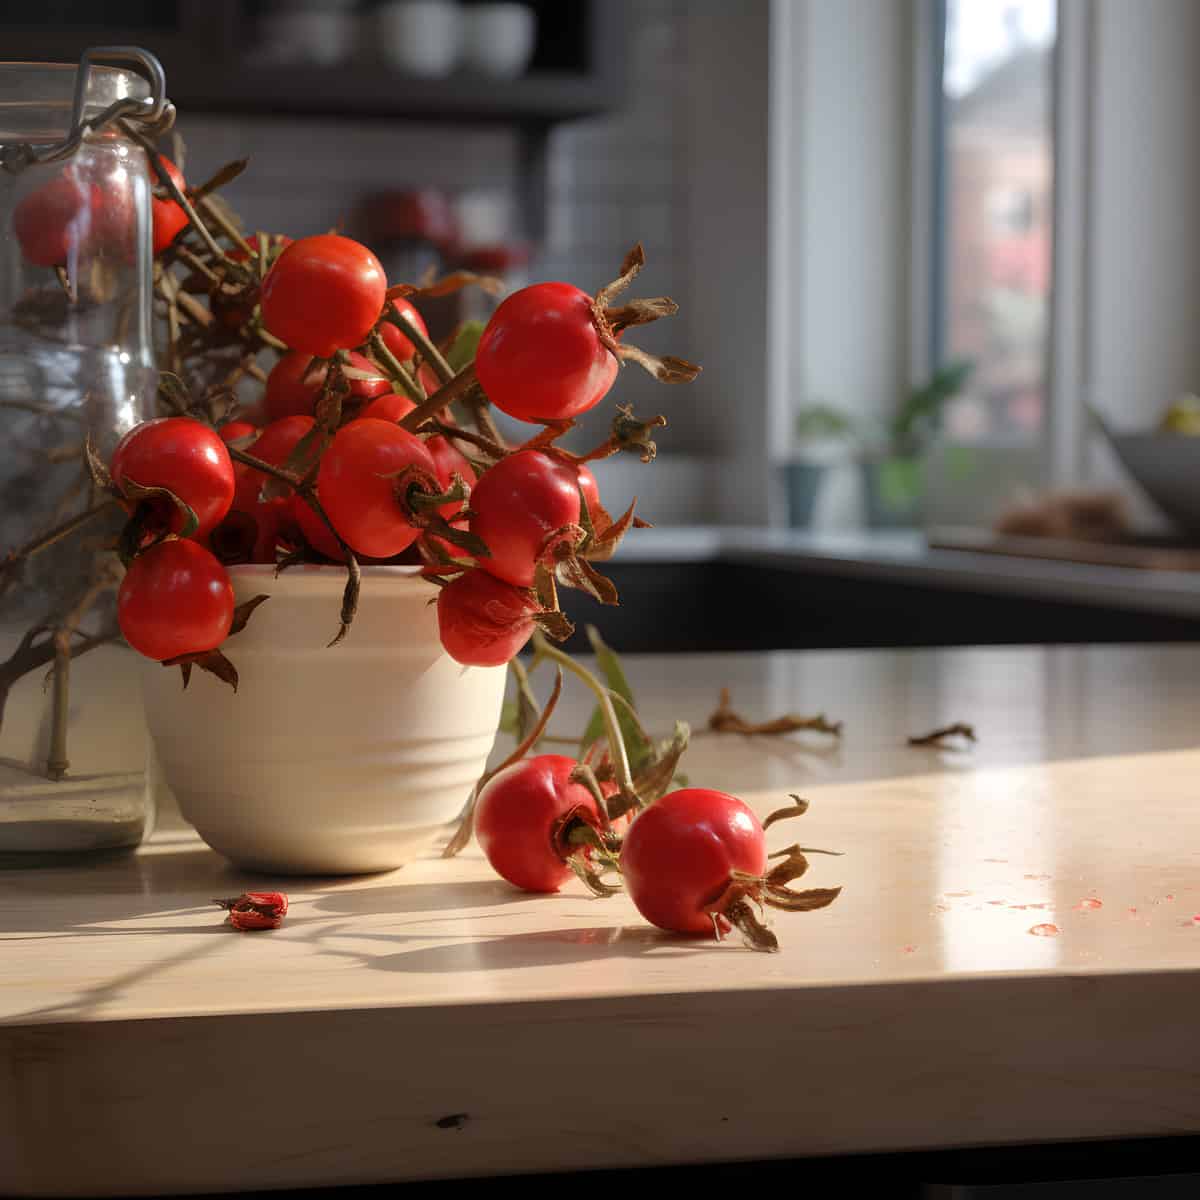 Rose Hip on a kitchen counter